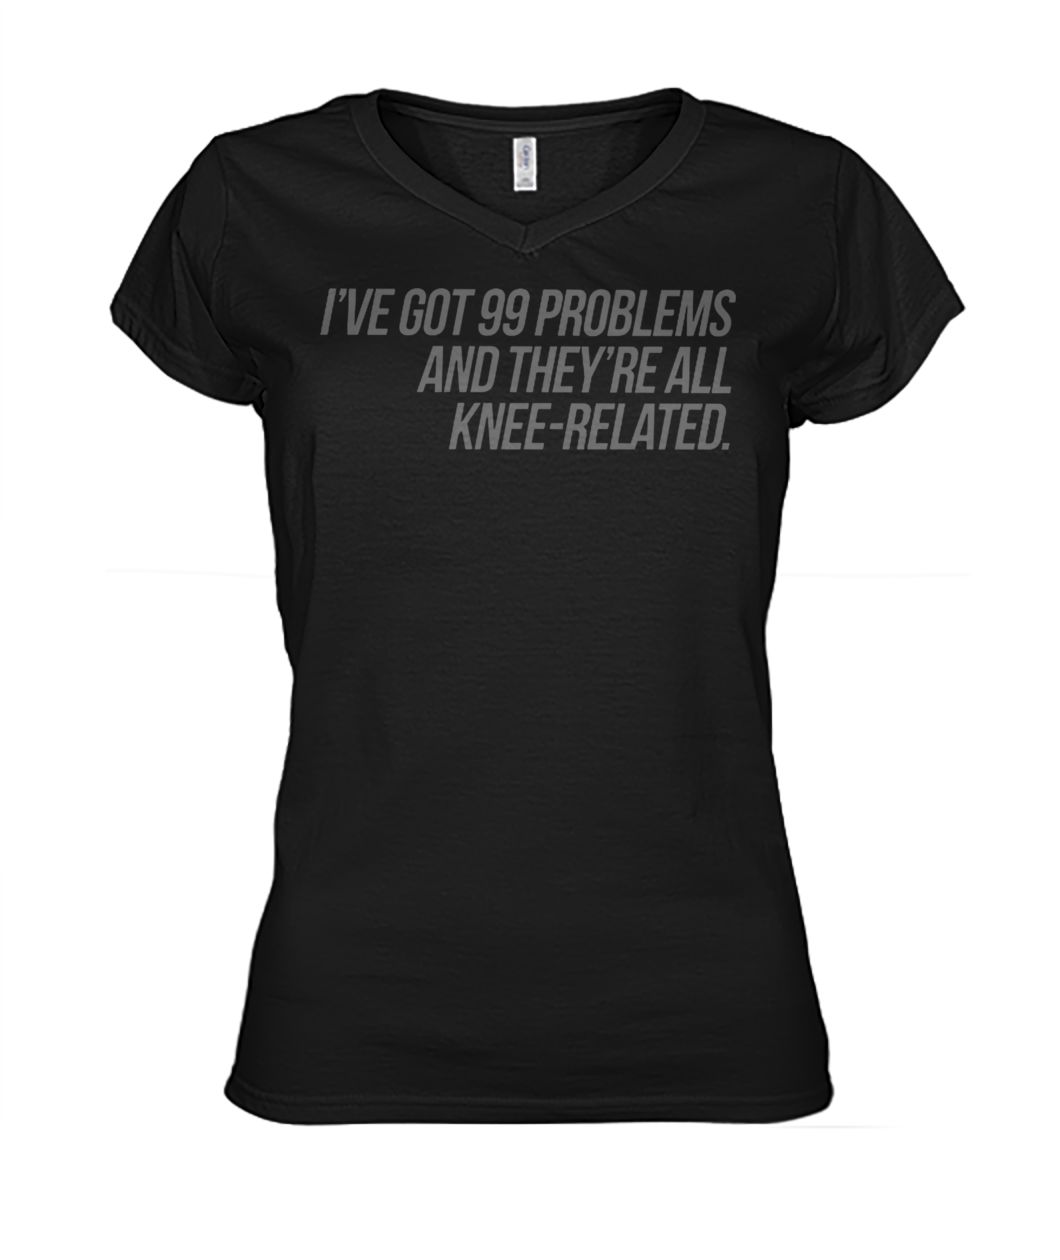 I've got 99 problems and they're all knee-related women's v-neck